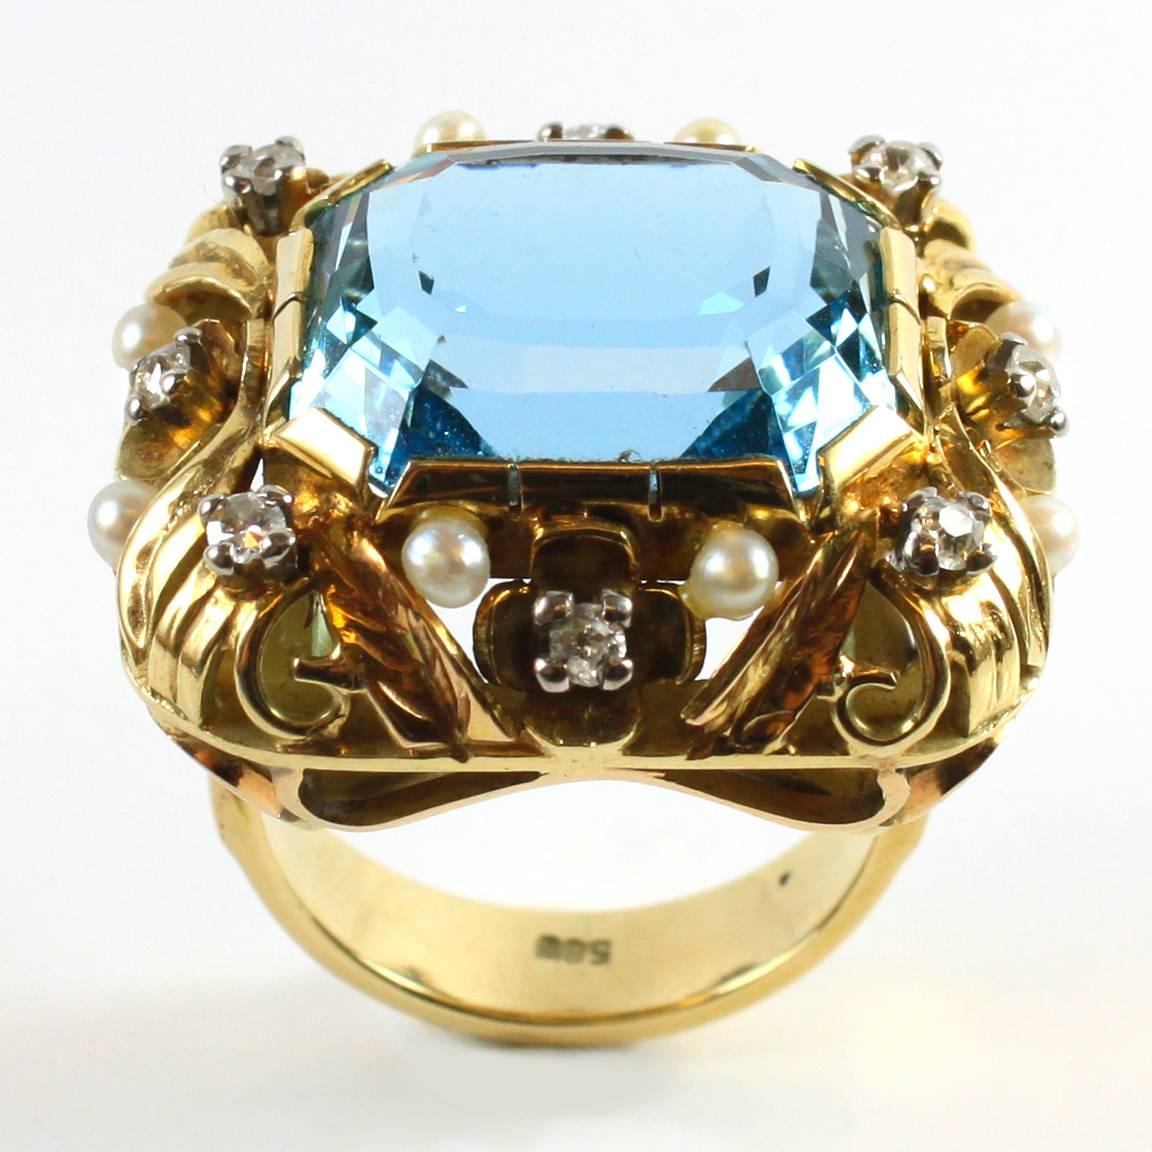 A aquamarine, pearl and diamond ring in a floral design in yellow gold from the Retro period, 1940s. The ring centres a big aquamarine, ca. 16 carats and it is accentuated by round brilliant cut diamonds and pearls.